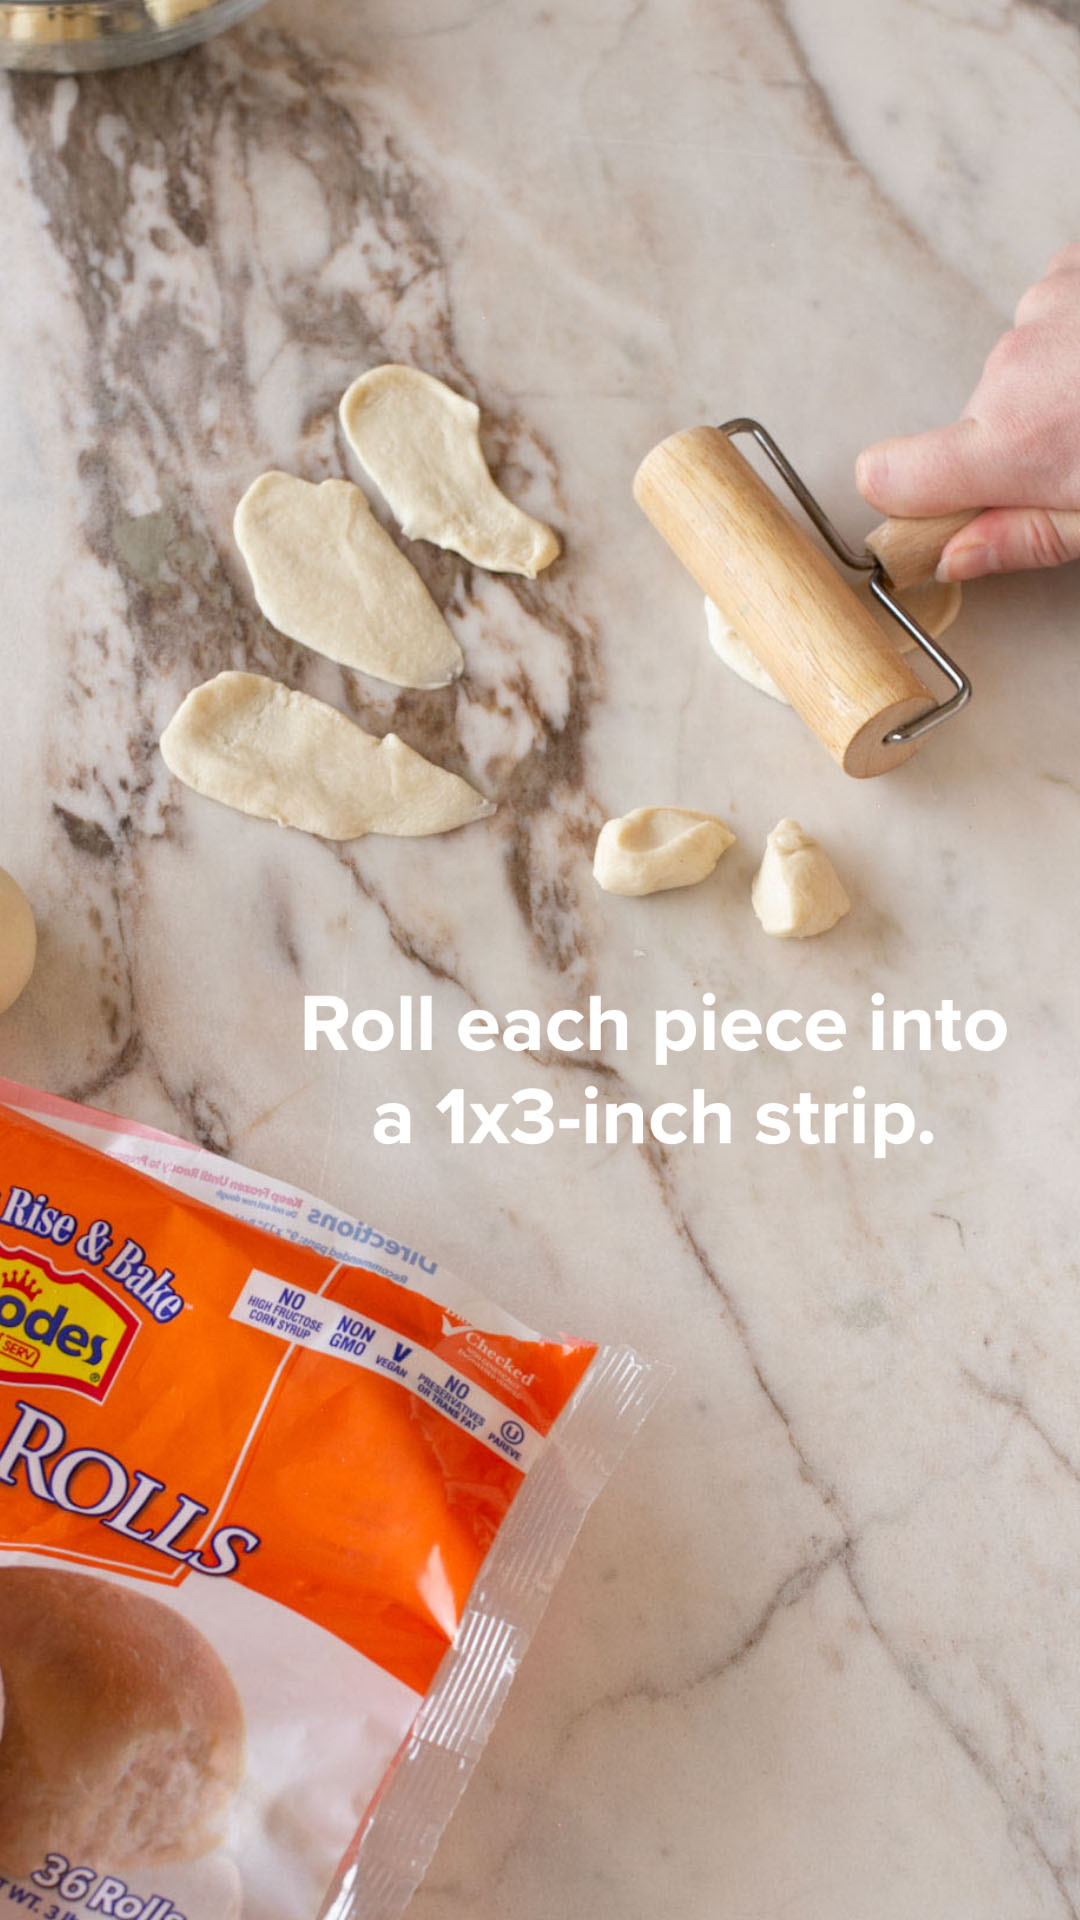 Roll 6 pieces into 1x3-inch strips.